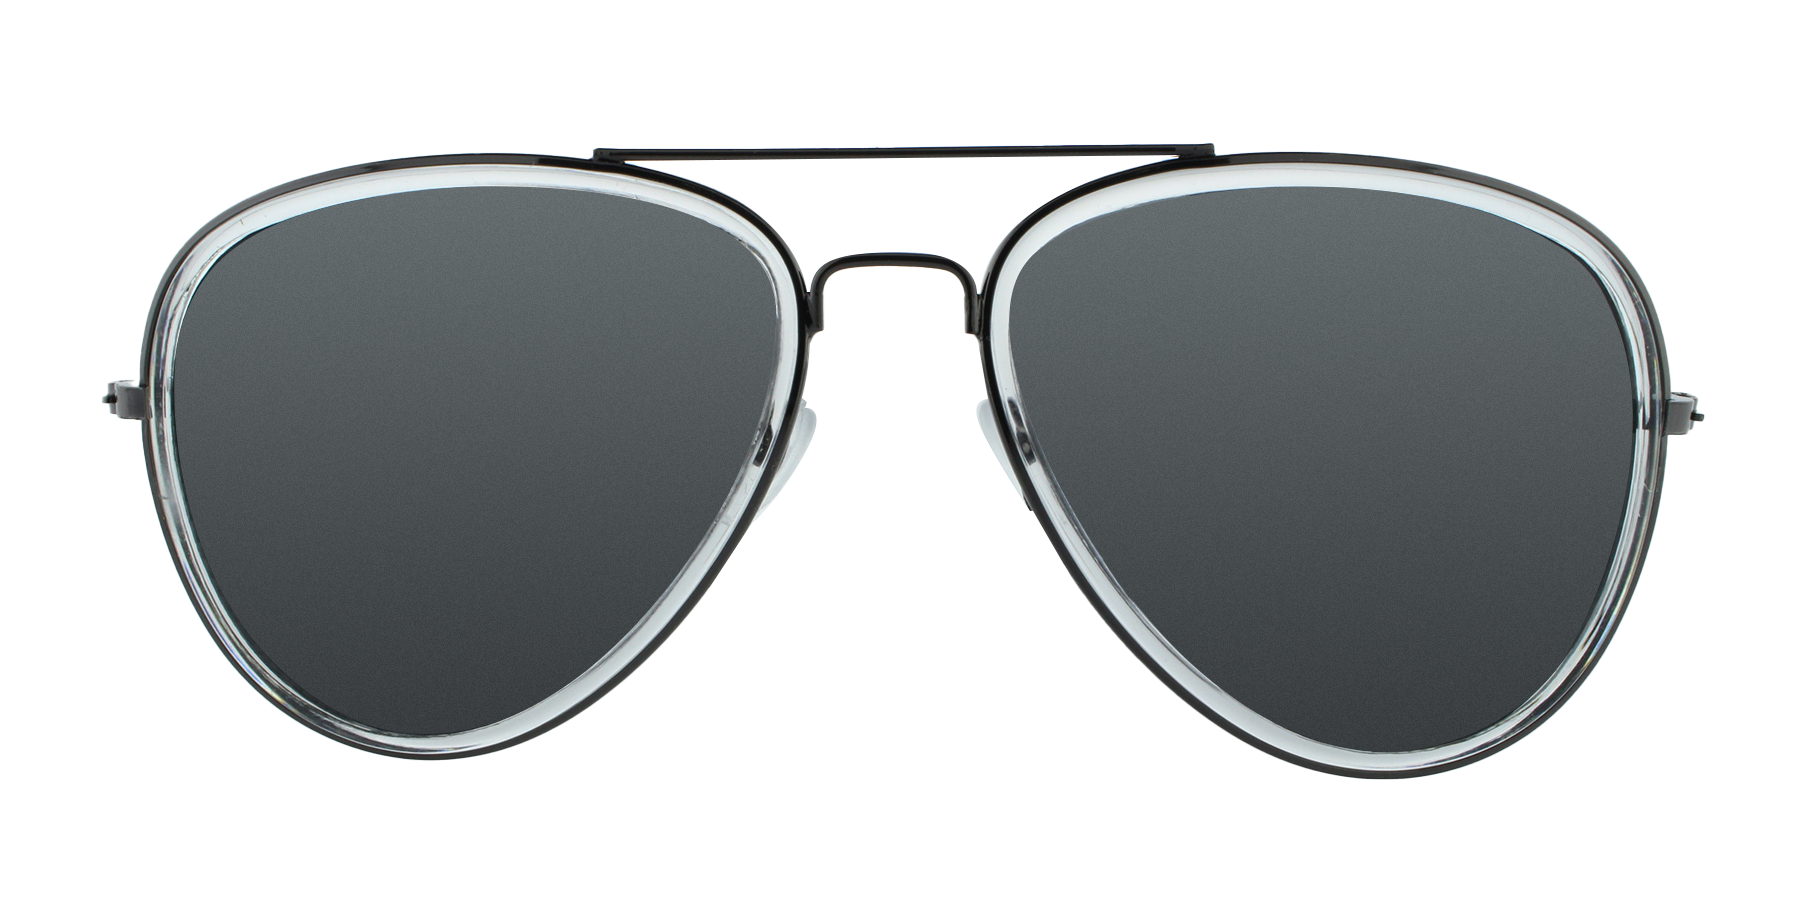 Drone -  Classic Aviator with Clear Rim and Gunmetal Frame (Smoked)